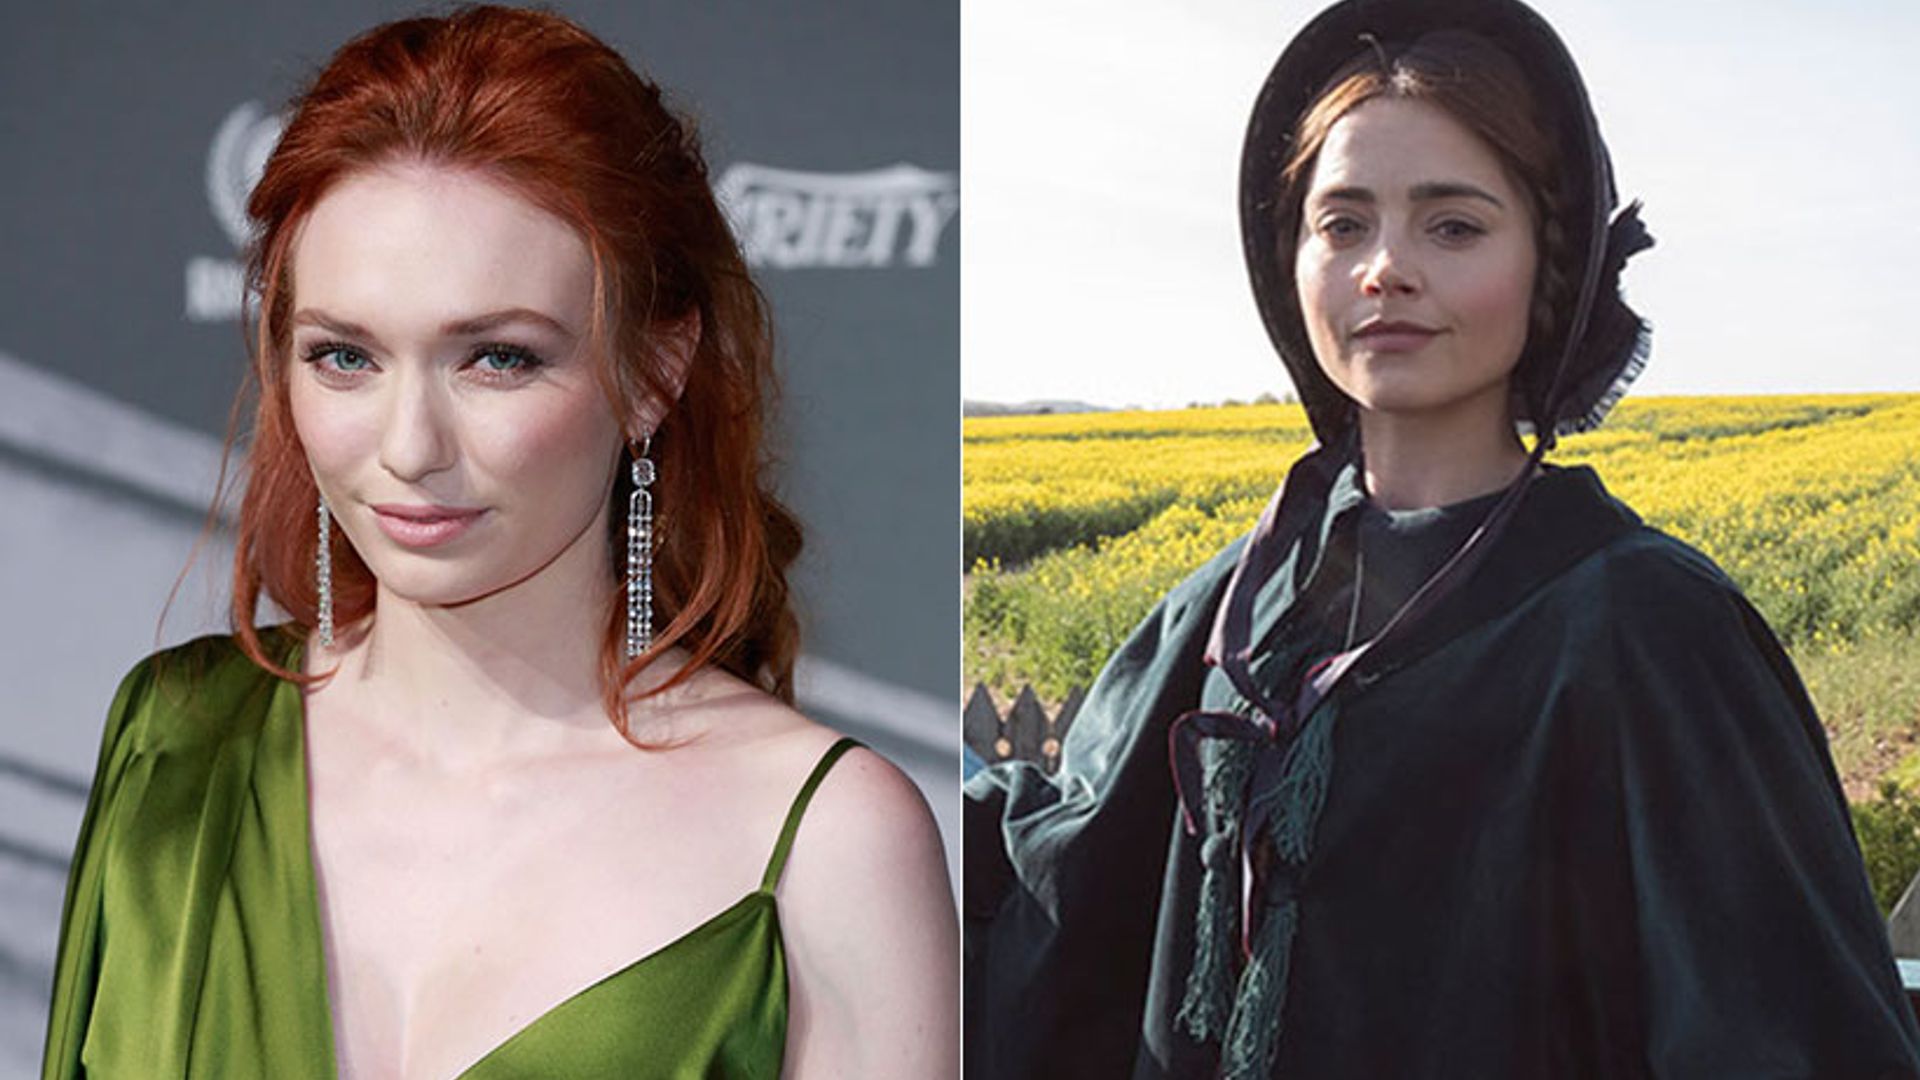 Poldark's Eleanor Tomlinson discusses rivalry with ITV's Victoria: 'It's a real shame'